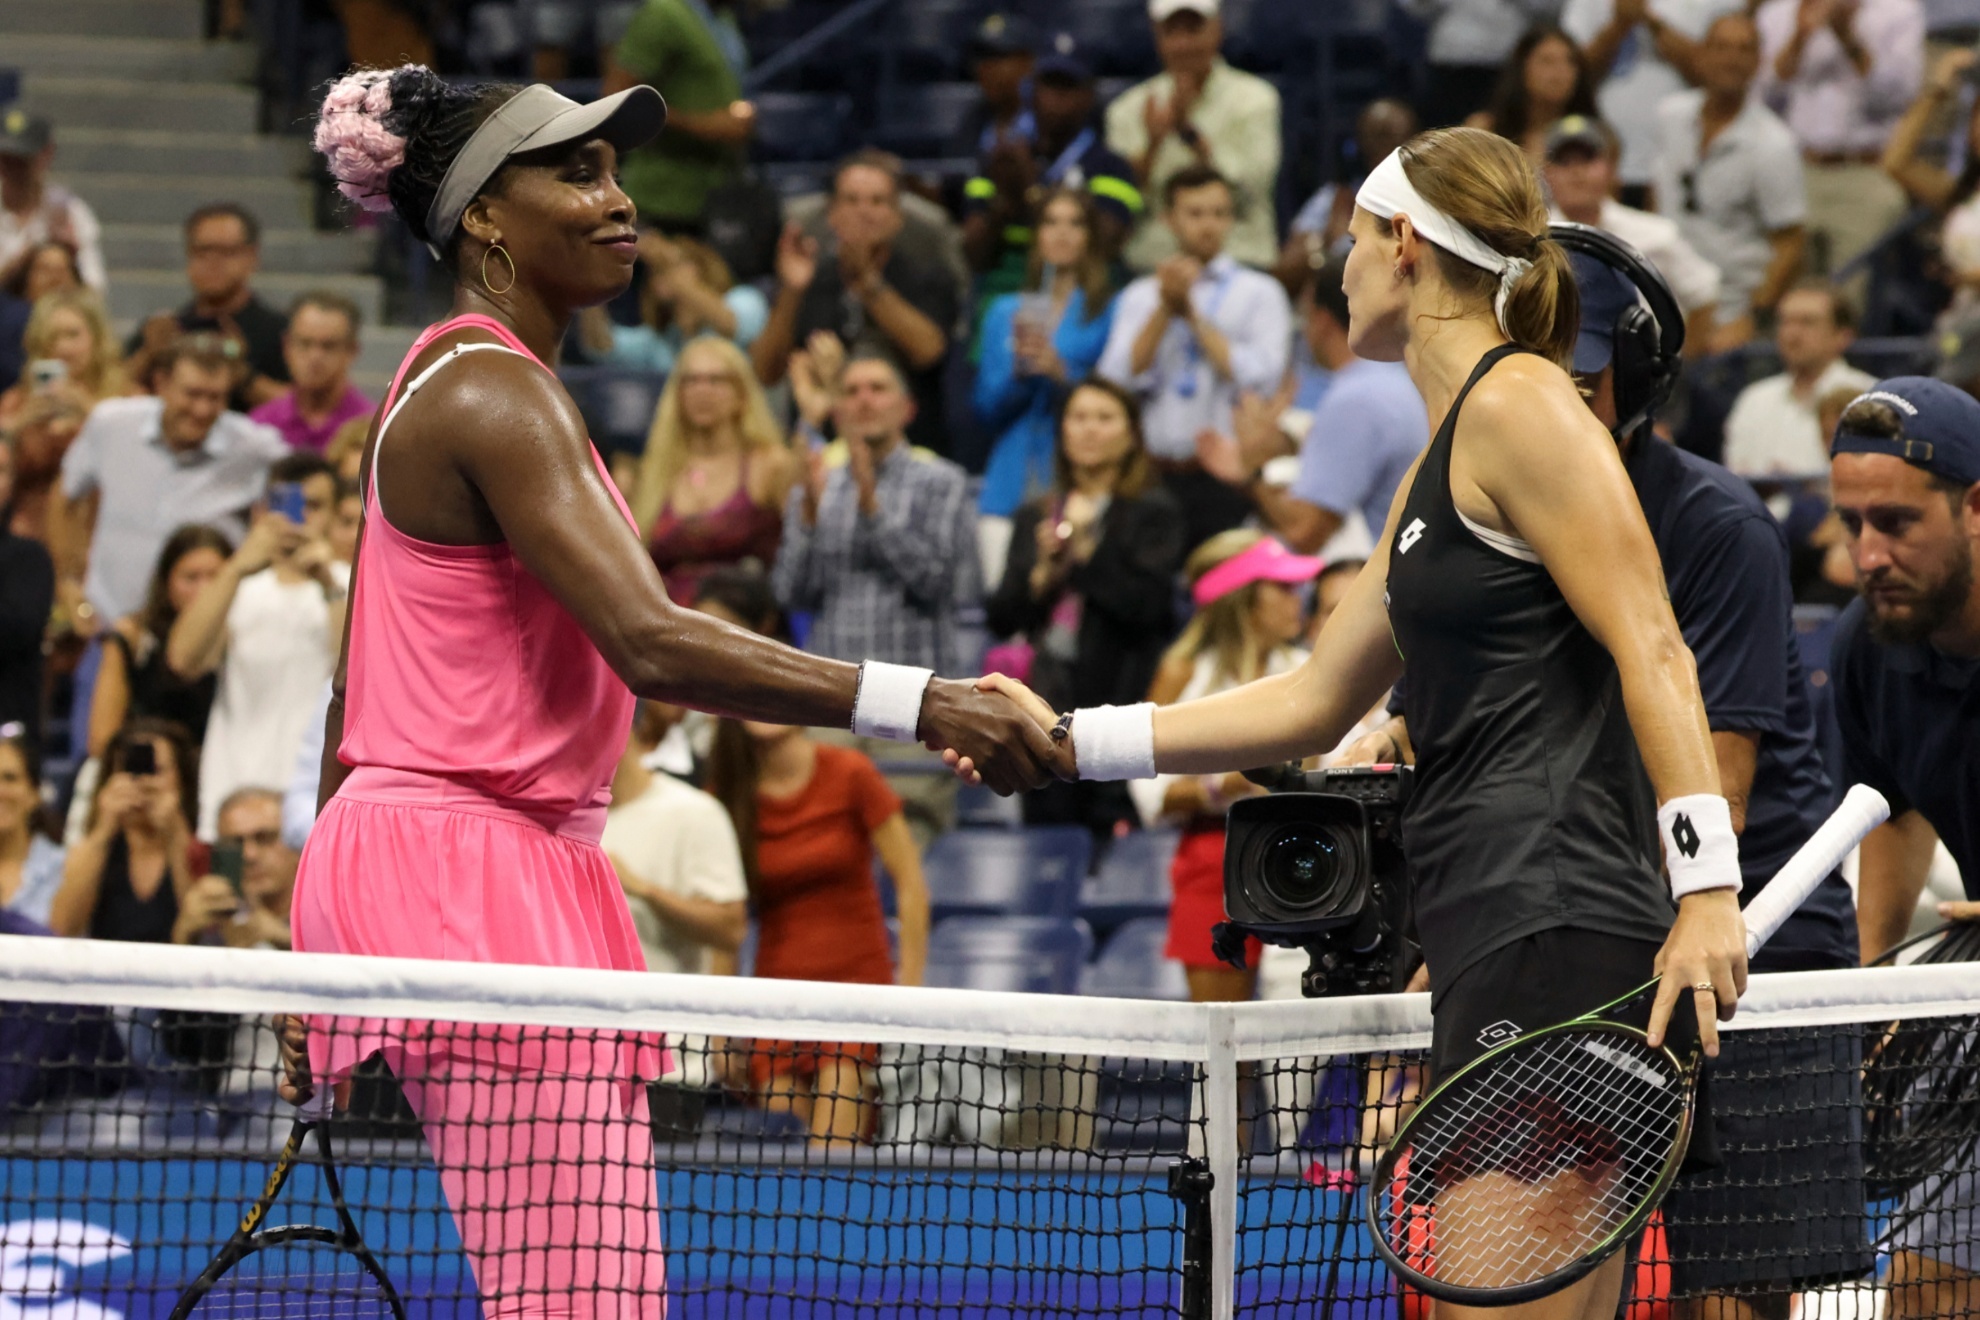 Venus Williams was defeated in the first round of the U.S. Open by Belgian Greet Minnen